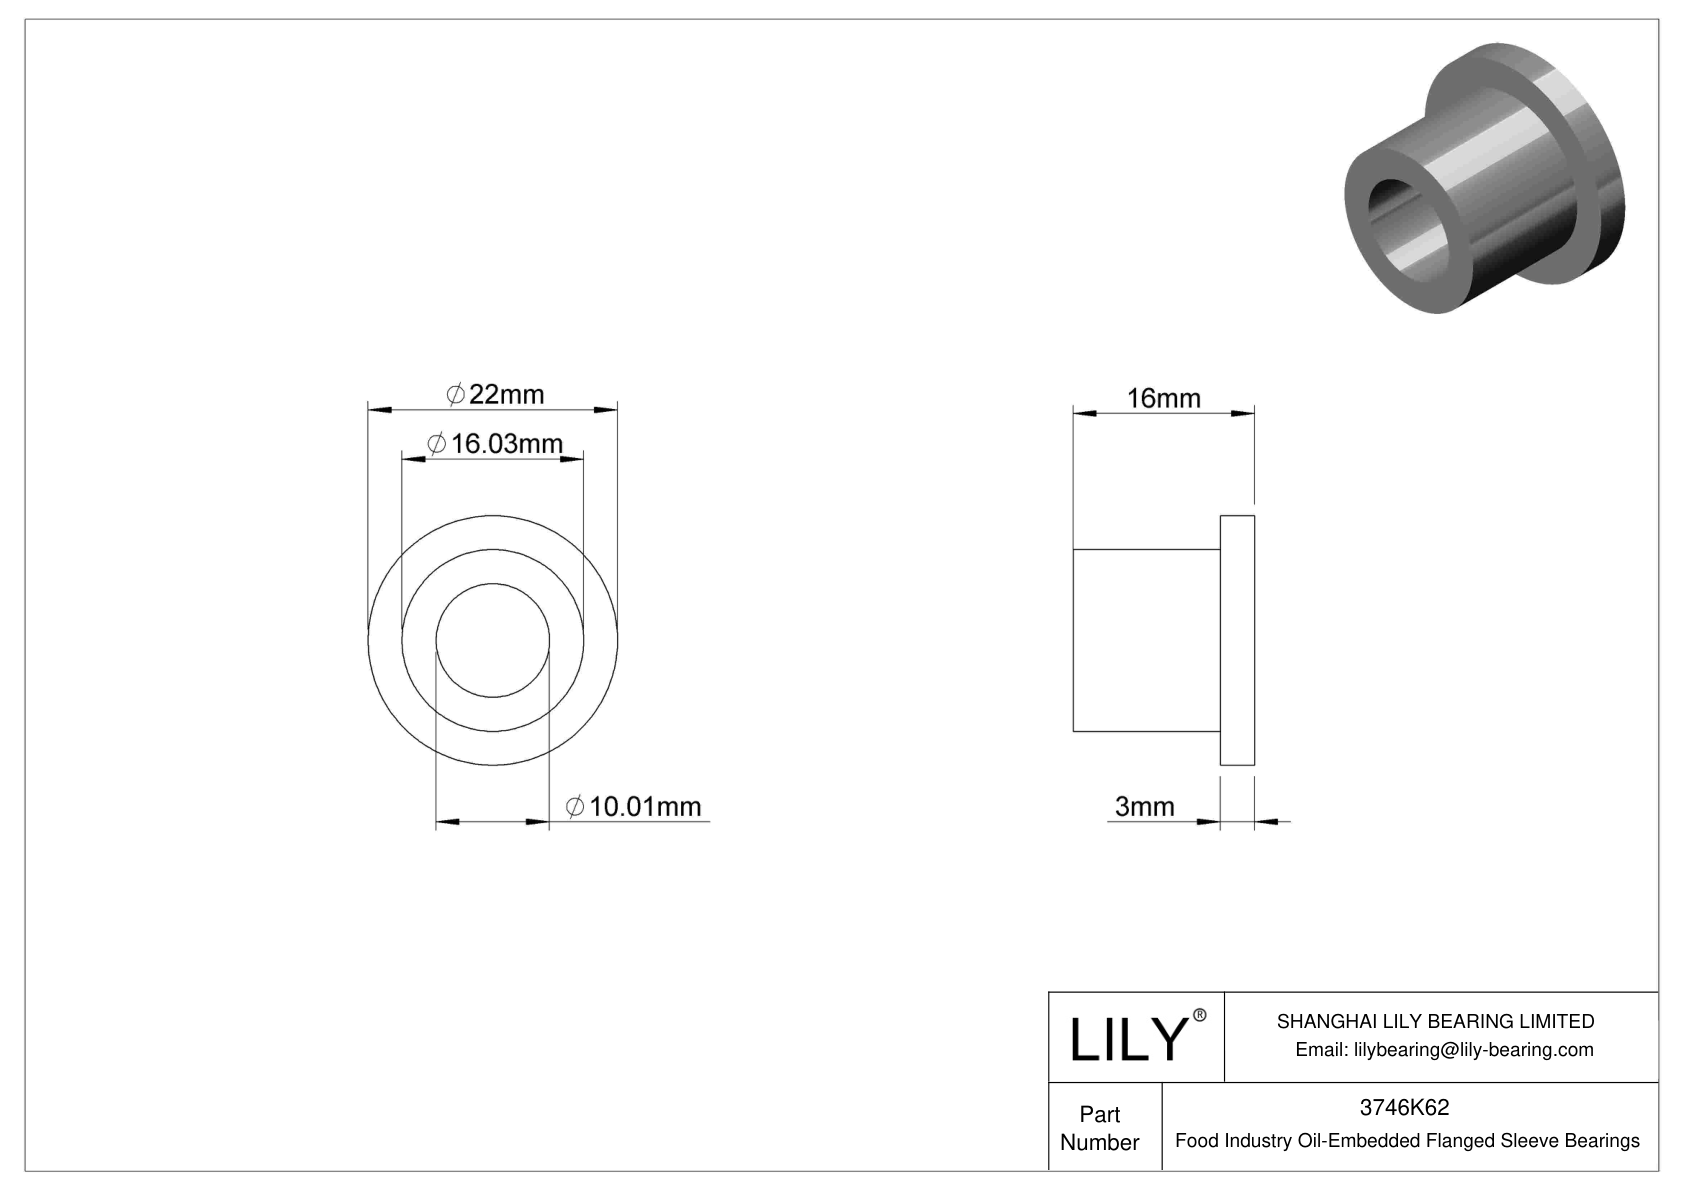 DHEGKGC Food Industry Oil-Embedded Flanged Sleeve Bearings cad drawing